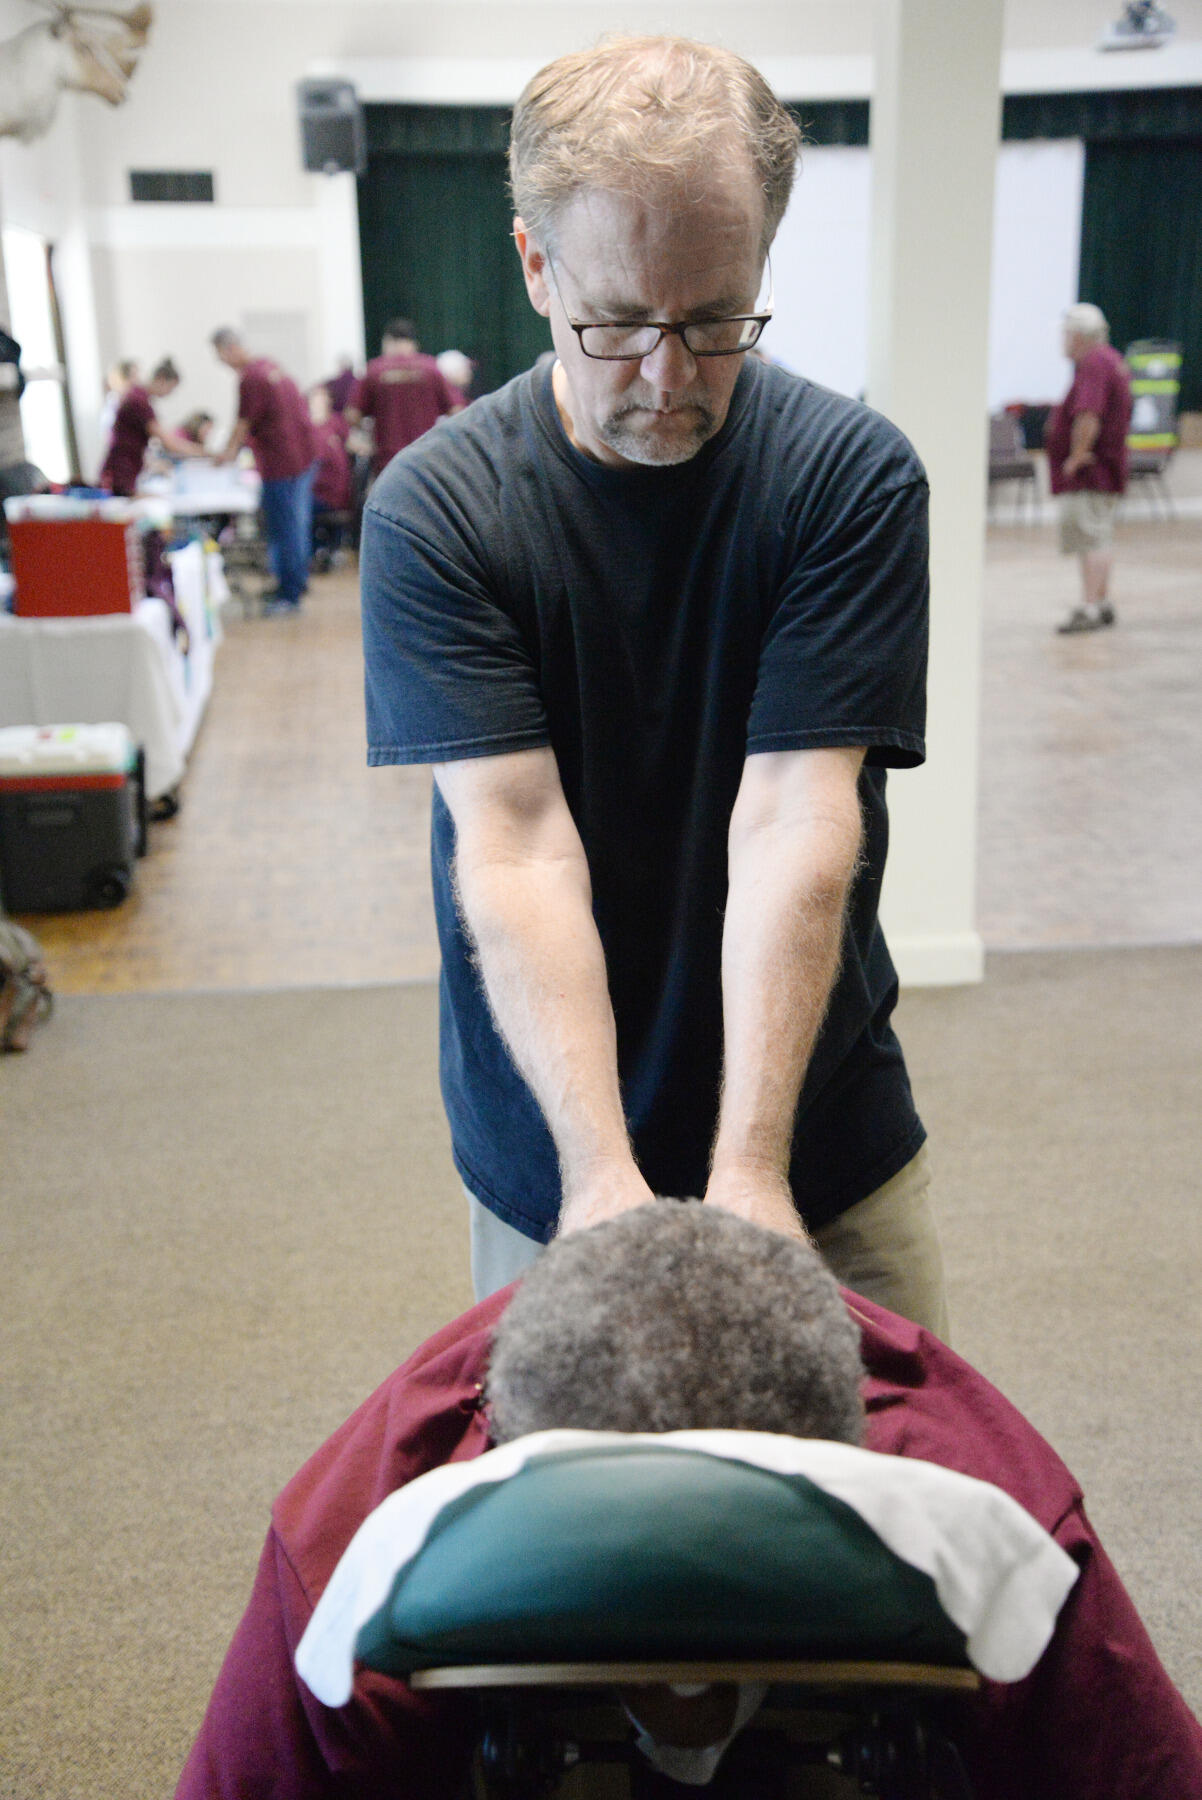 James Arbuckle of Nimbus Massage gives a massage to a participant at the Retreat and Refresh Stroke Camp sponsored by VCU Health.